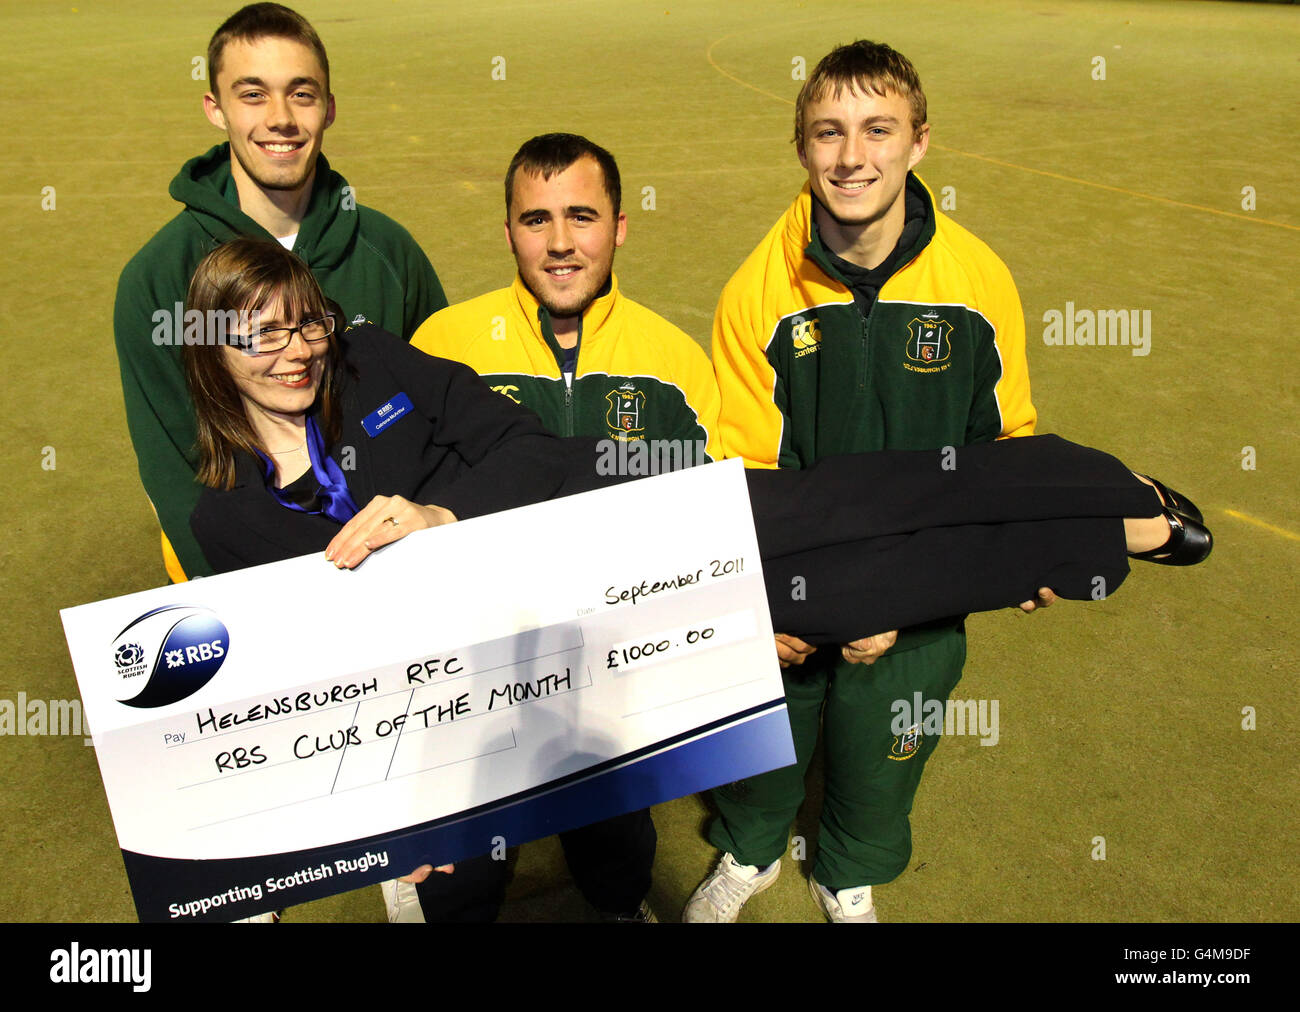 Helensburgh Rugby Club players Aaron Sterry (left), Terry Smith (centre) and David Sterry with local Royal Bank of Scotland rugby representative Catriona McArthur after the club won RBS club of the month for September during a photocall at Helensbrugh Rugby Club, Helensbrugh. Stock Photo